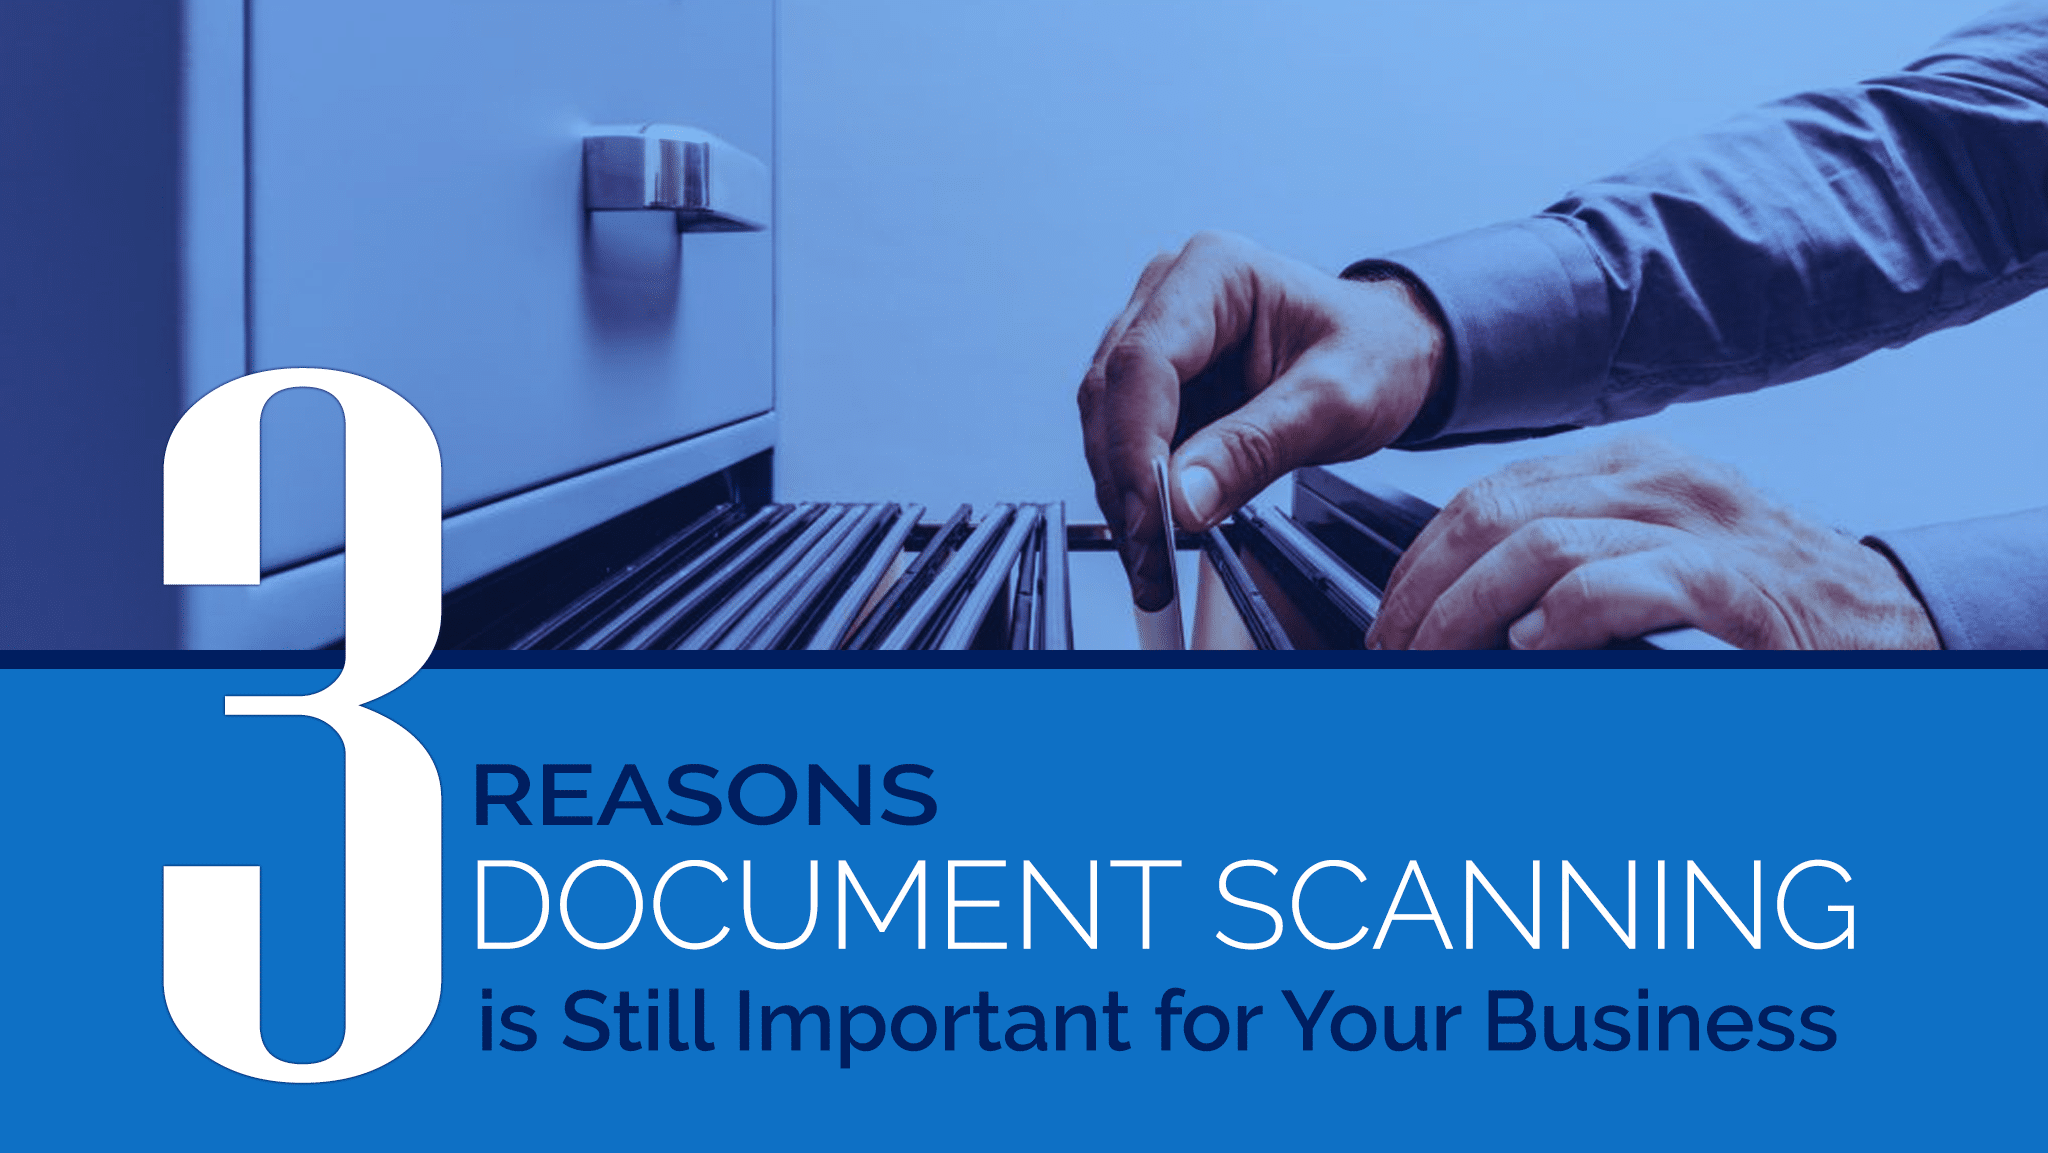 3 Reasons Document Scanning is Still Relevant for Your Business